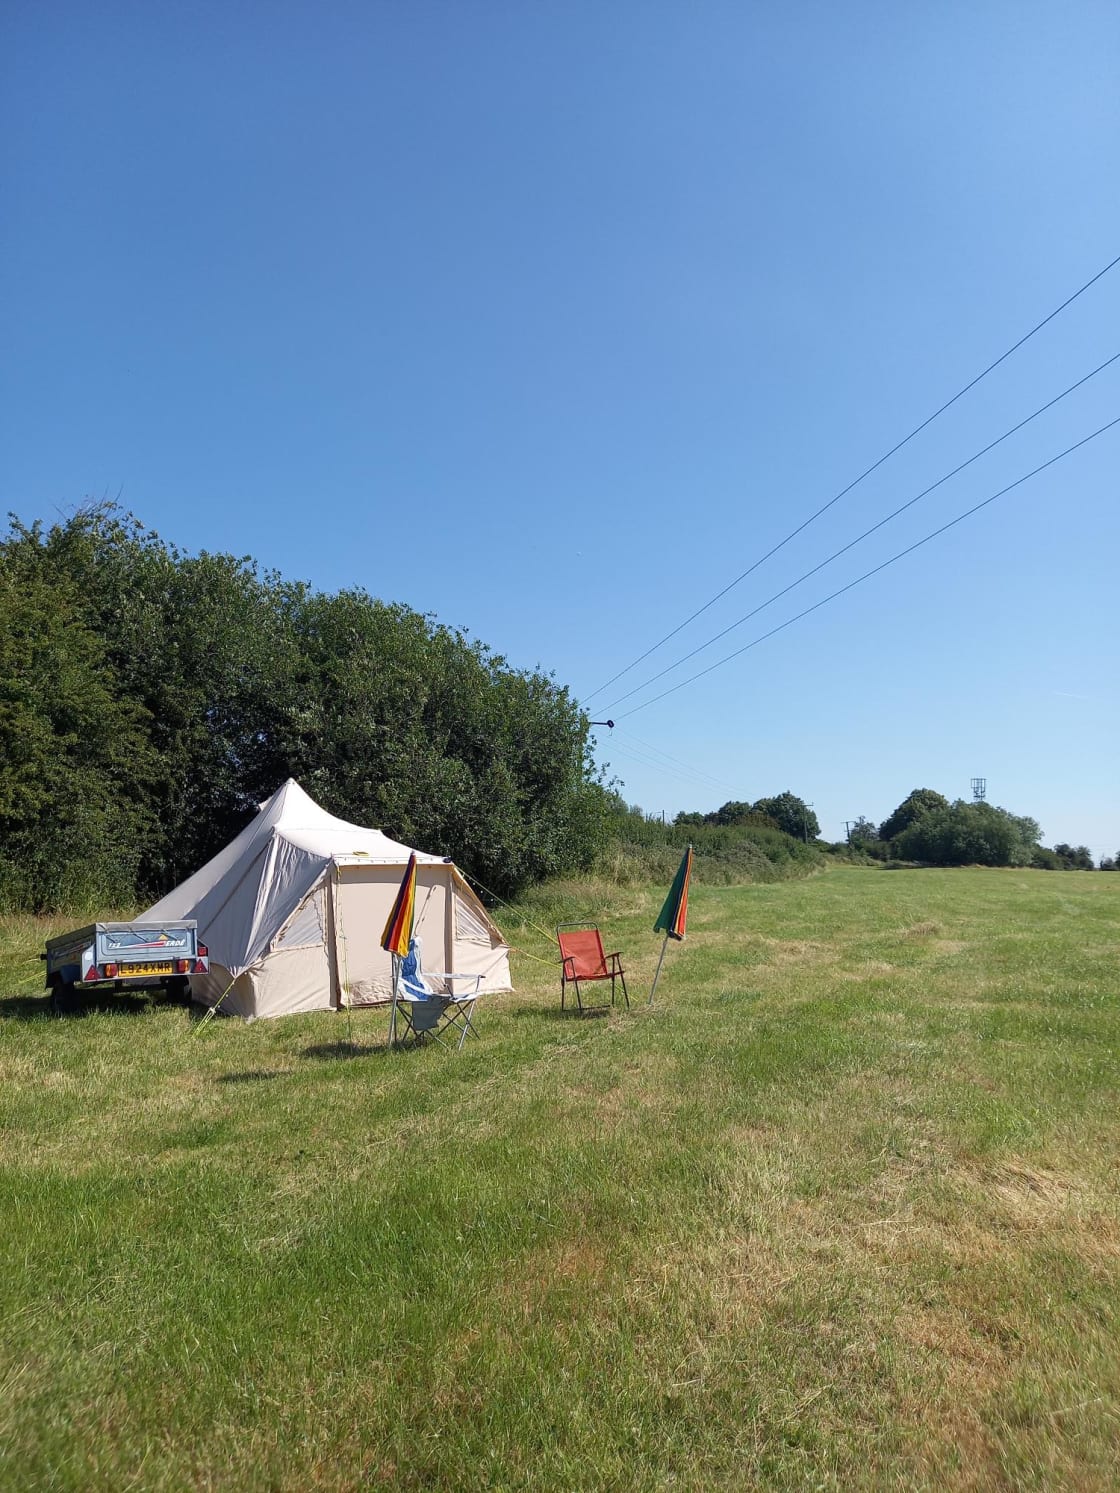 Tent Pitch - an example of how spacious the pitches are, no fences, just open field. Have as much space as you like!